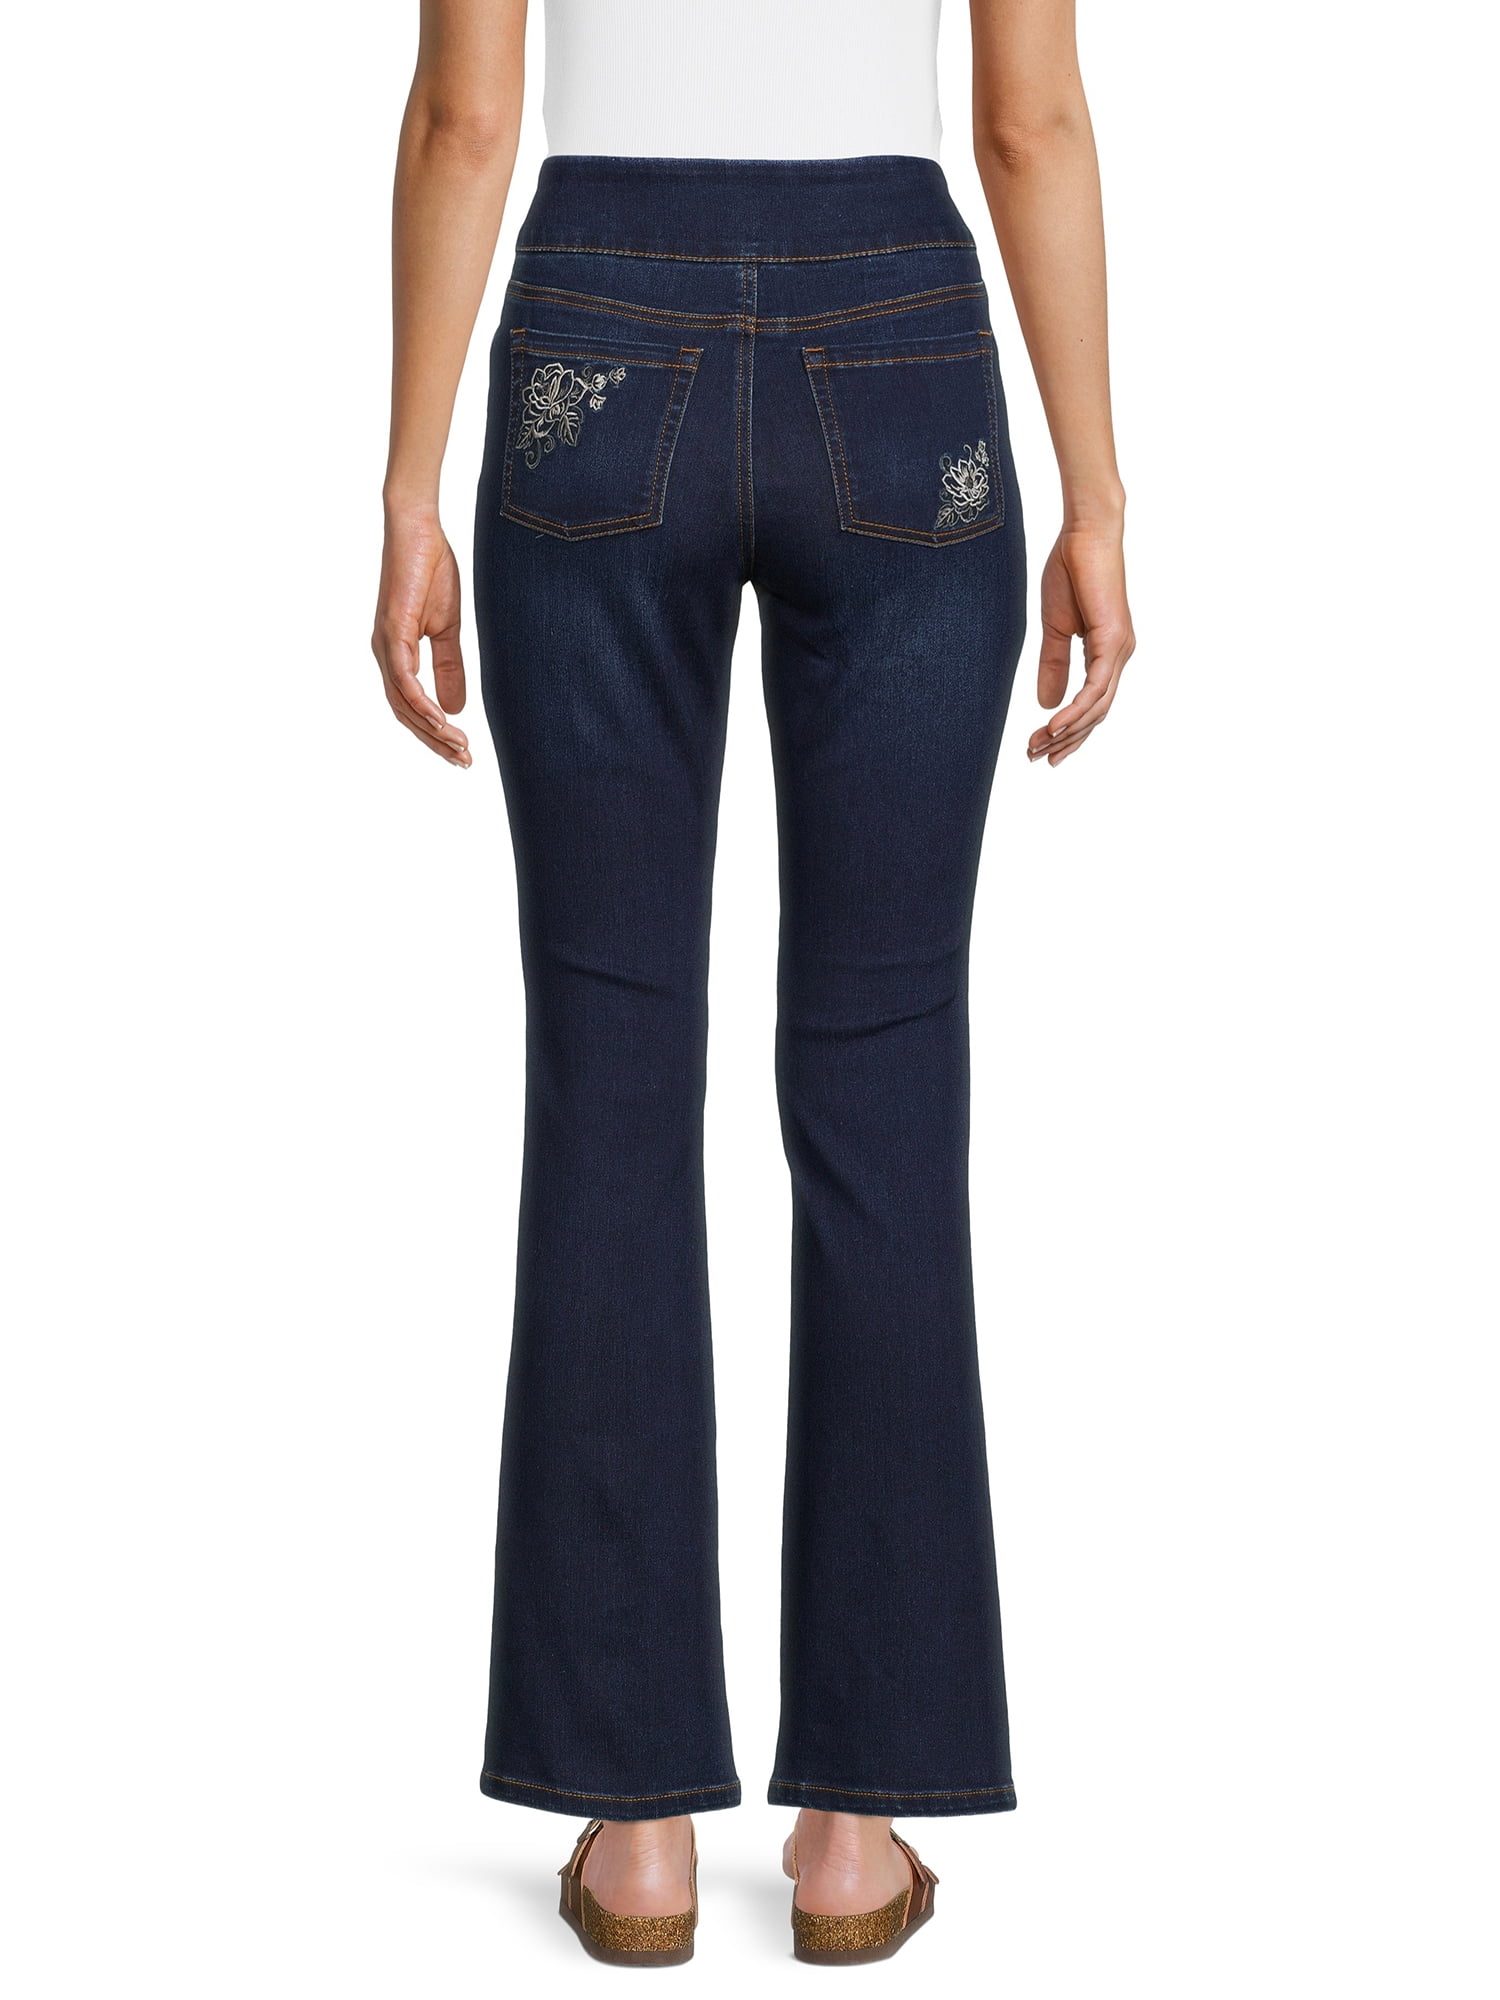 AaduduBa Jeans With Embroidery Designs On Back,jeanx With Pocket For  Women,Used To Match Tops, Outdoor Sports, Show Your Fashion Style : Buy  Online at Best Price in KSA - Souq is now